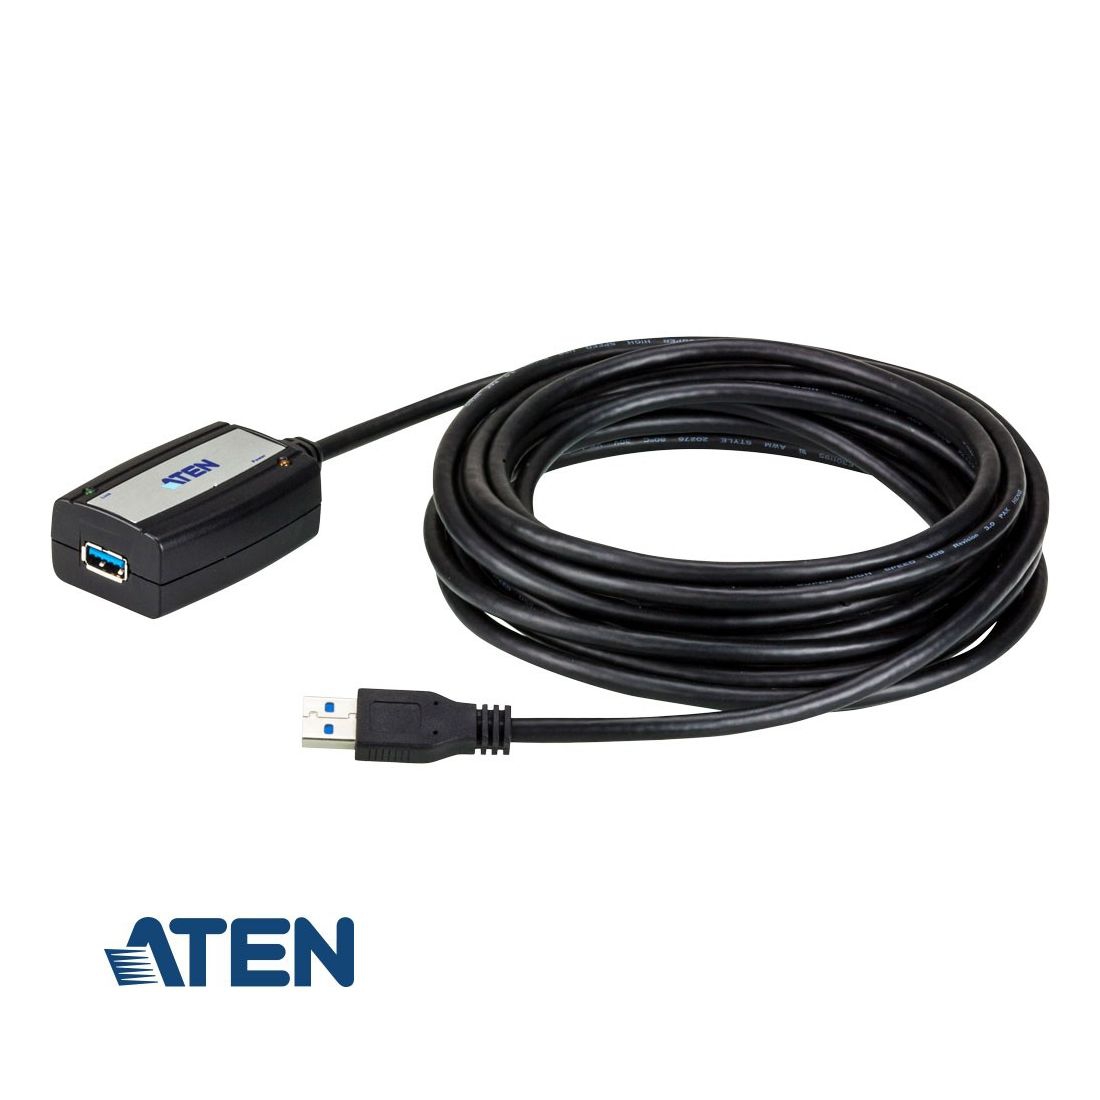 Active USB 3.0 extension UE350A from ATEN 5m